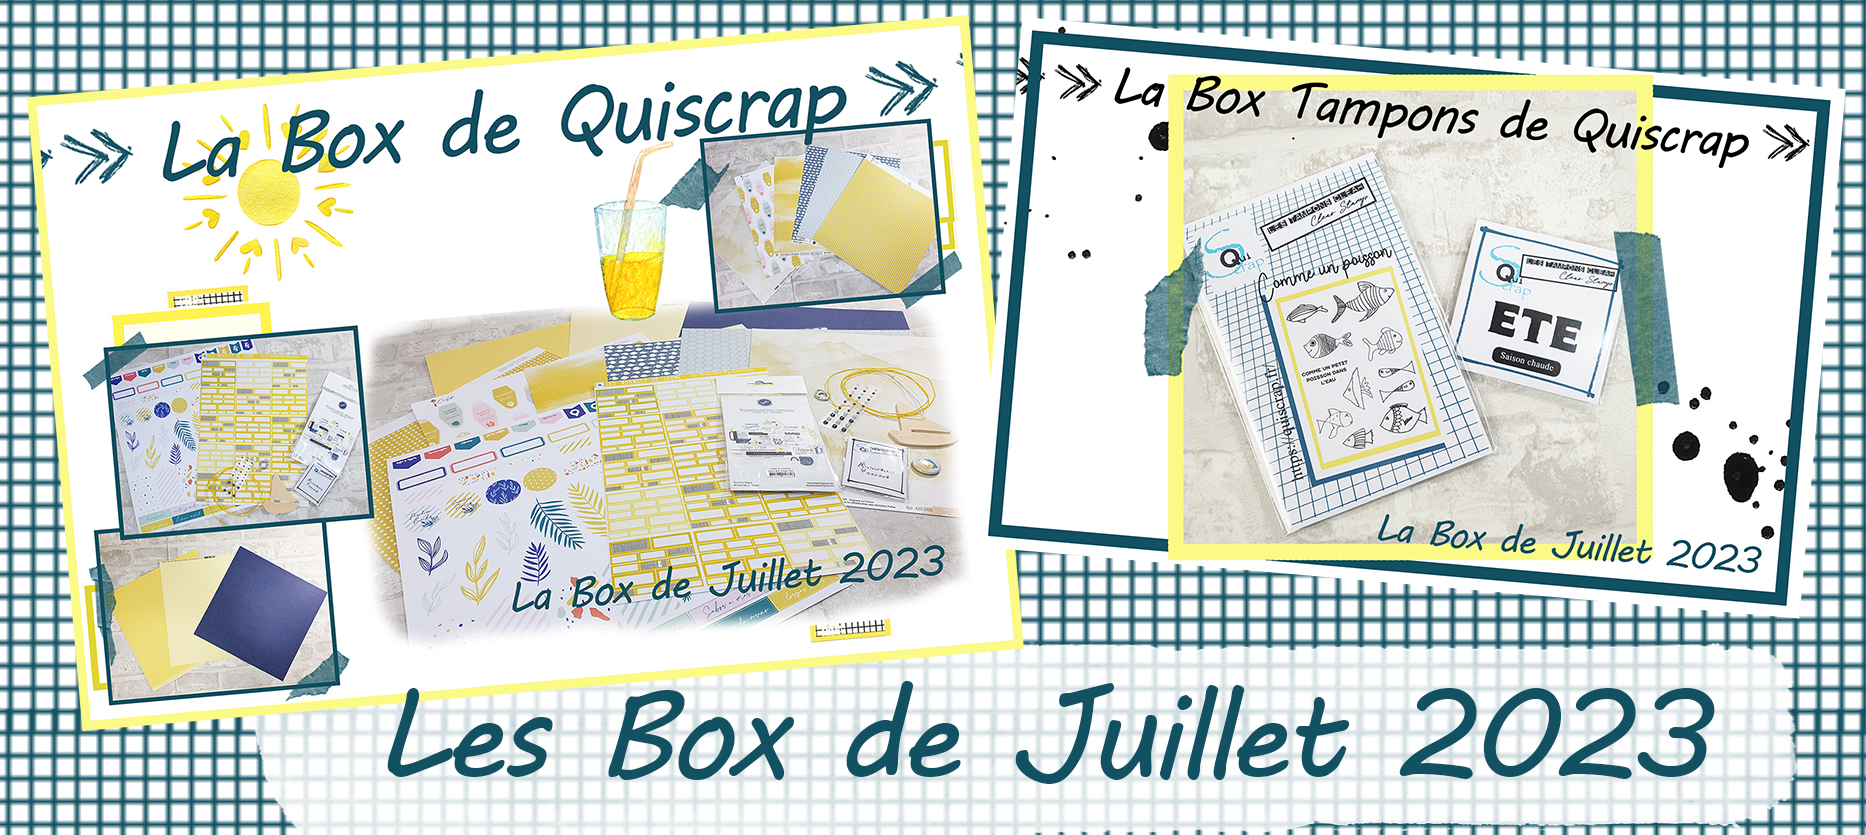 You are currently viewing Les Box de Juillet 2023